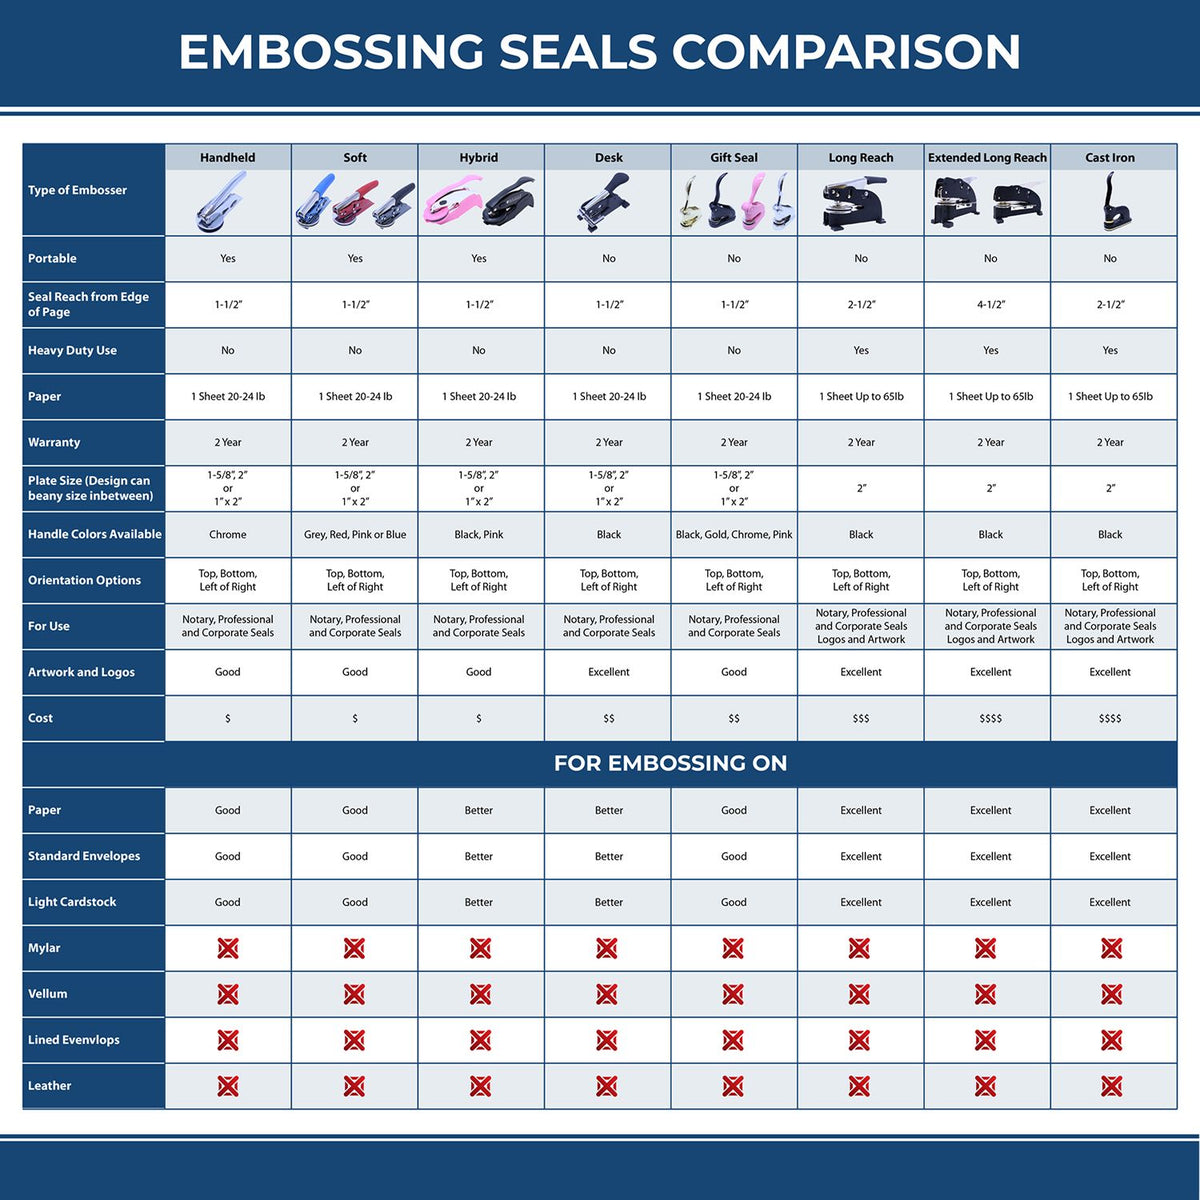 A comparison chart for the different types of mount models available for the Handheld Minnesota Land Surveyor Seal.